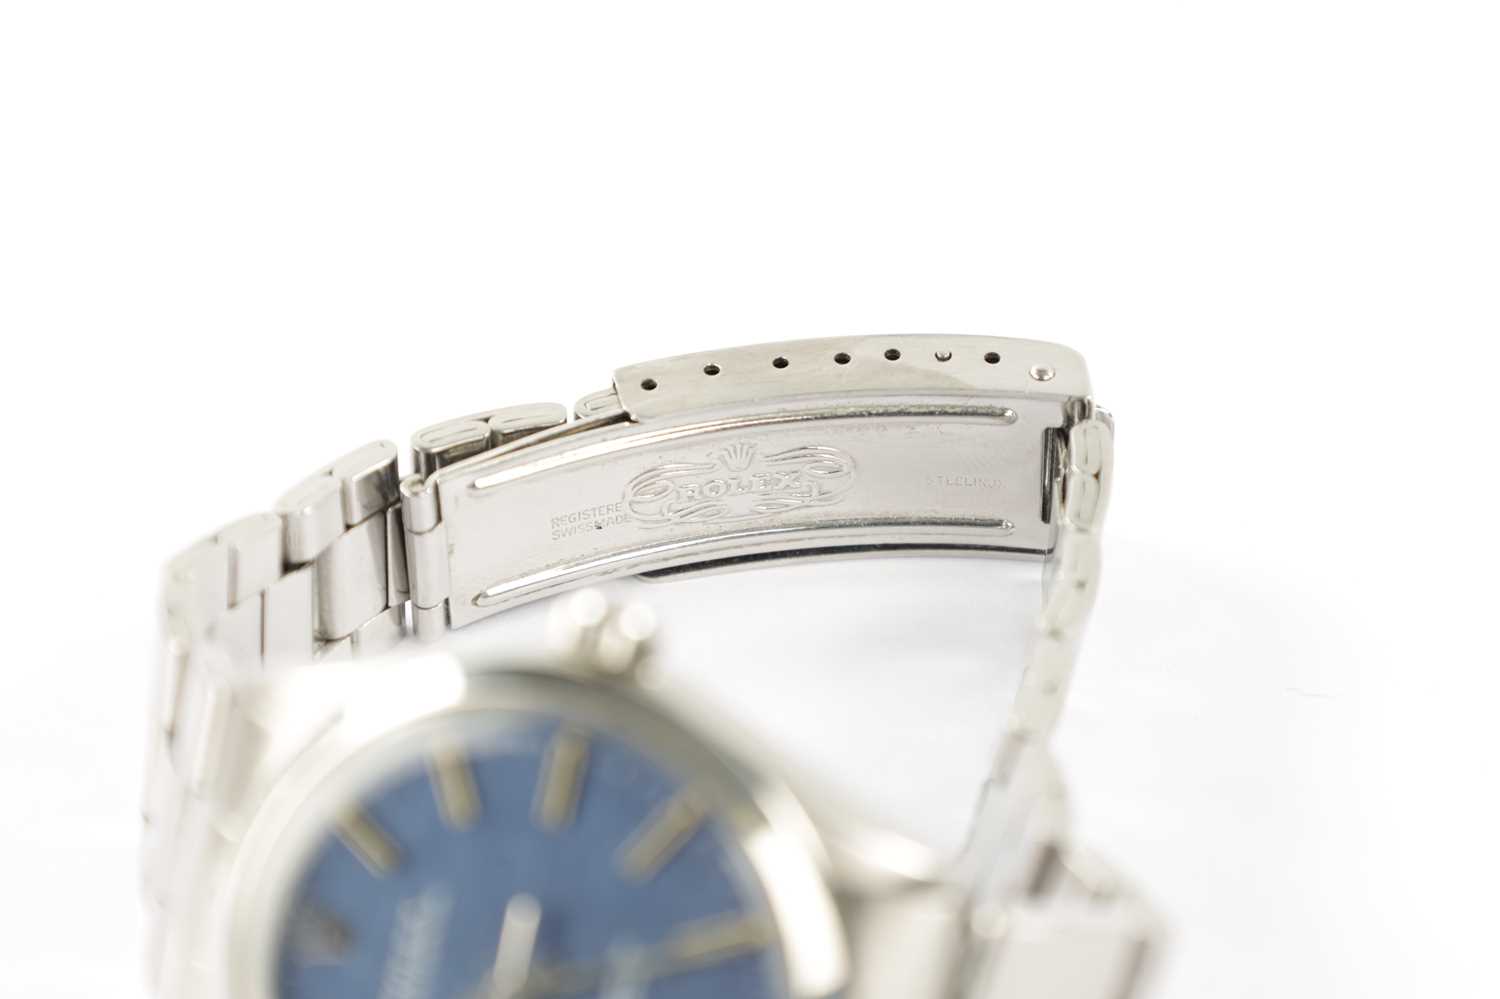 A GENTLEMAN’S 1970’S STEEL ROLEX OYSTER WRISTWATCH WITH RARE MOSAIC DIAL - Image 5 of 10